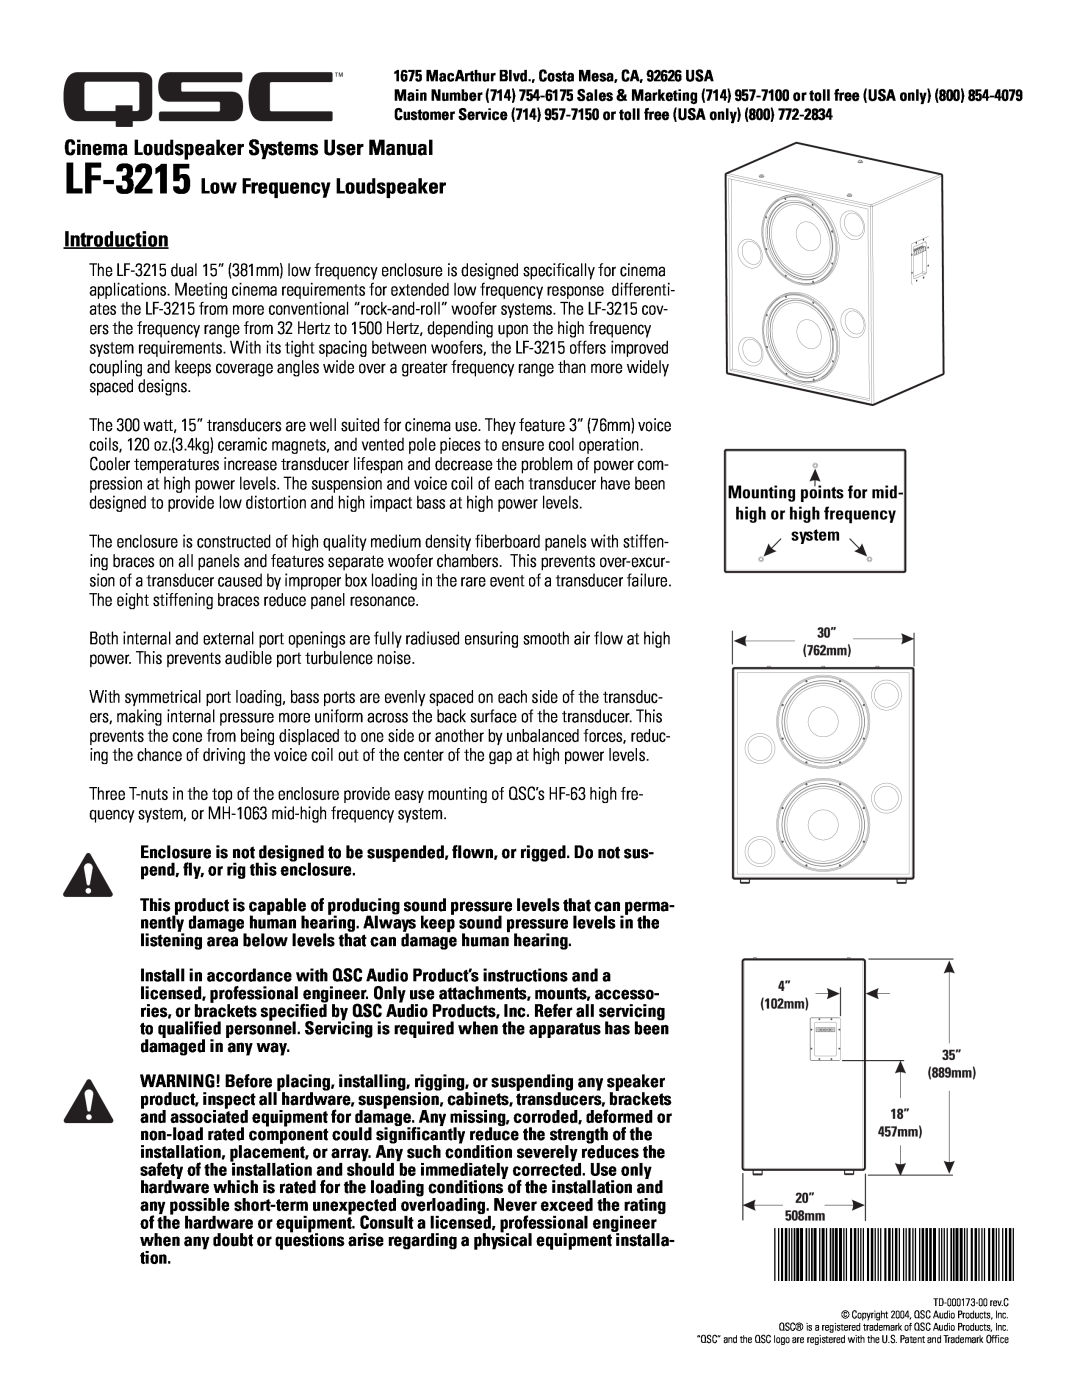 QSC Audio SC-322 specifications LF-3215 Low Frequency Loudspeaker Introduction, TD-000173-00 